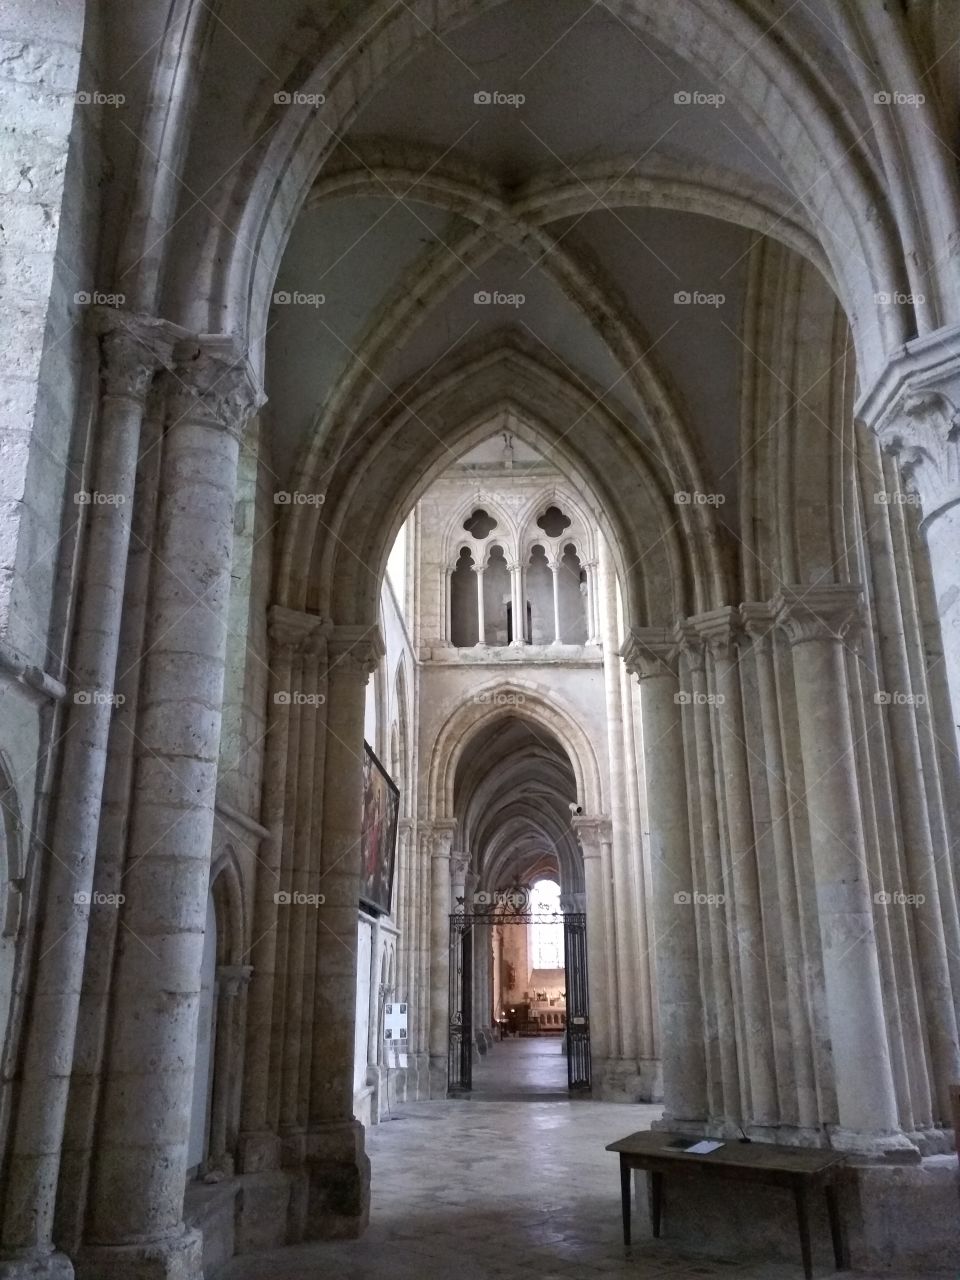 At a cathedral, France